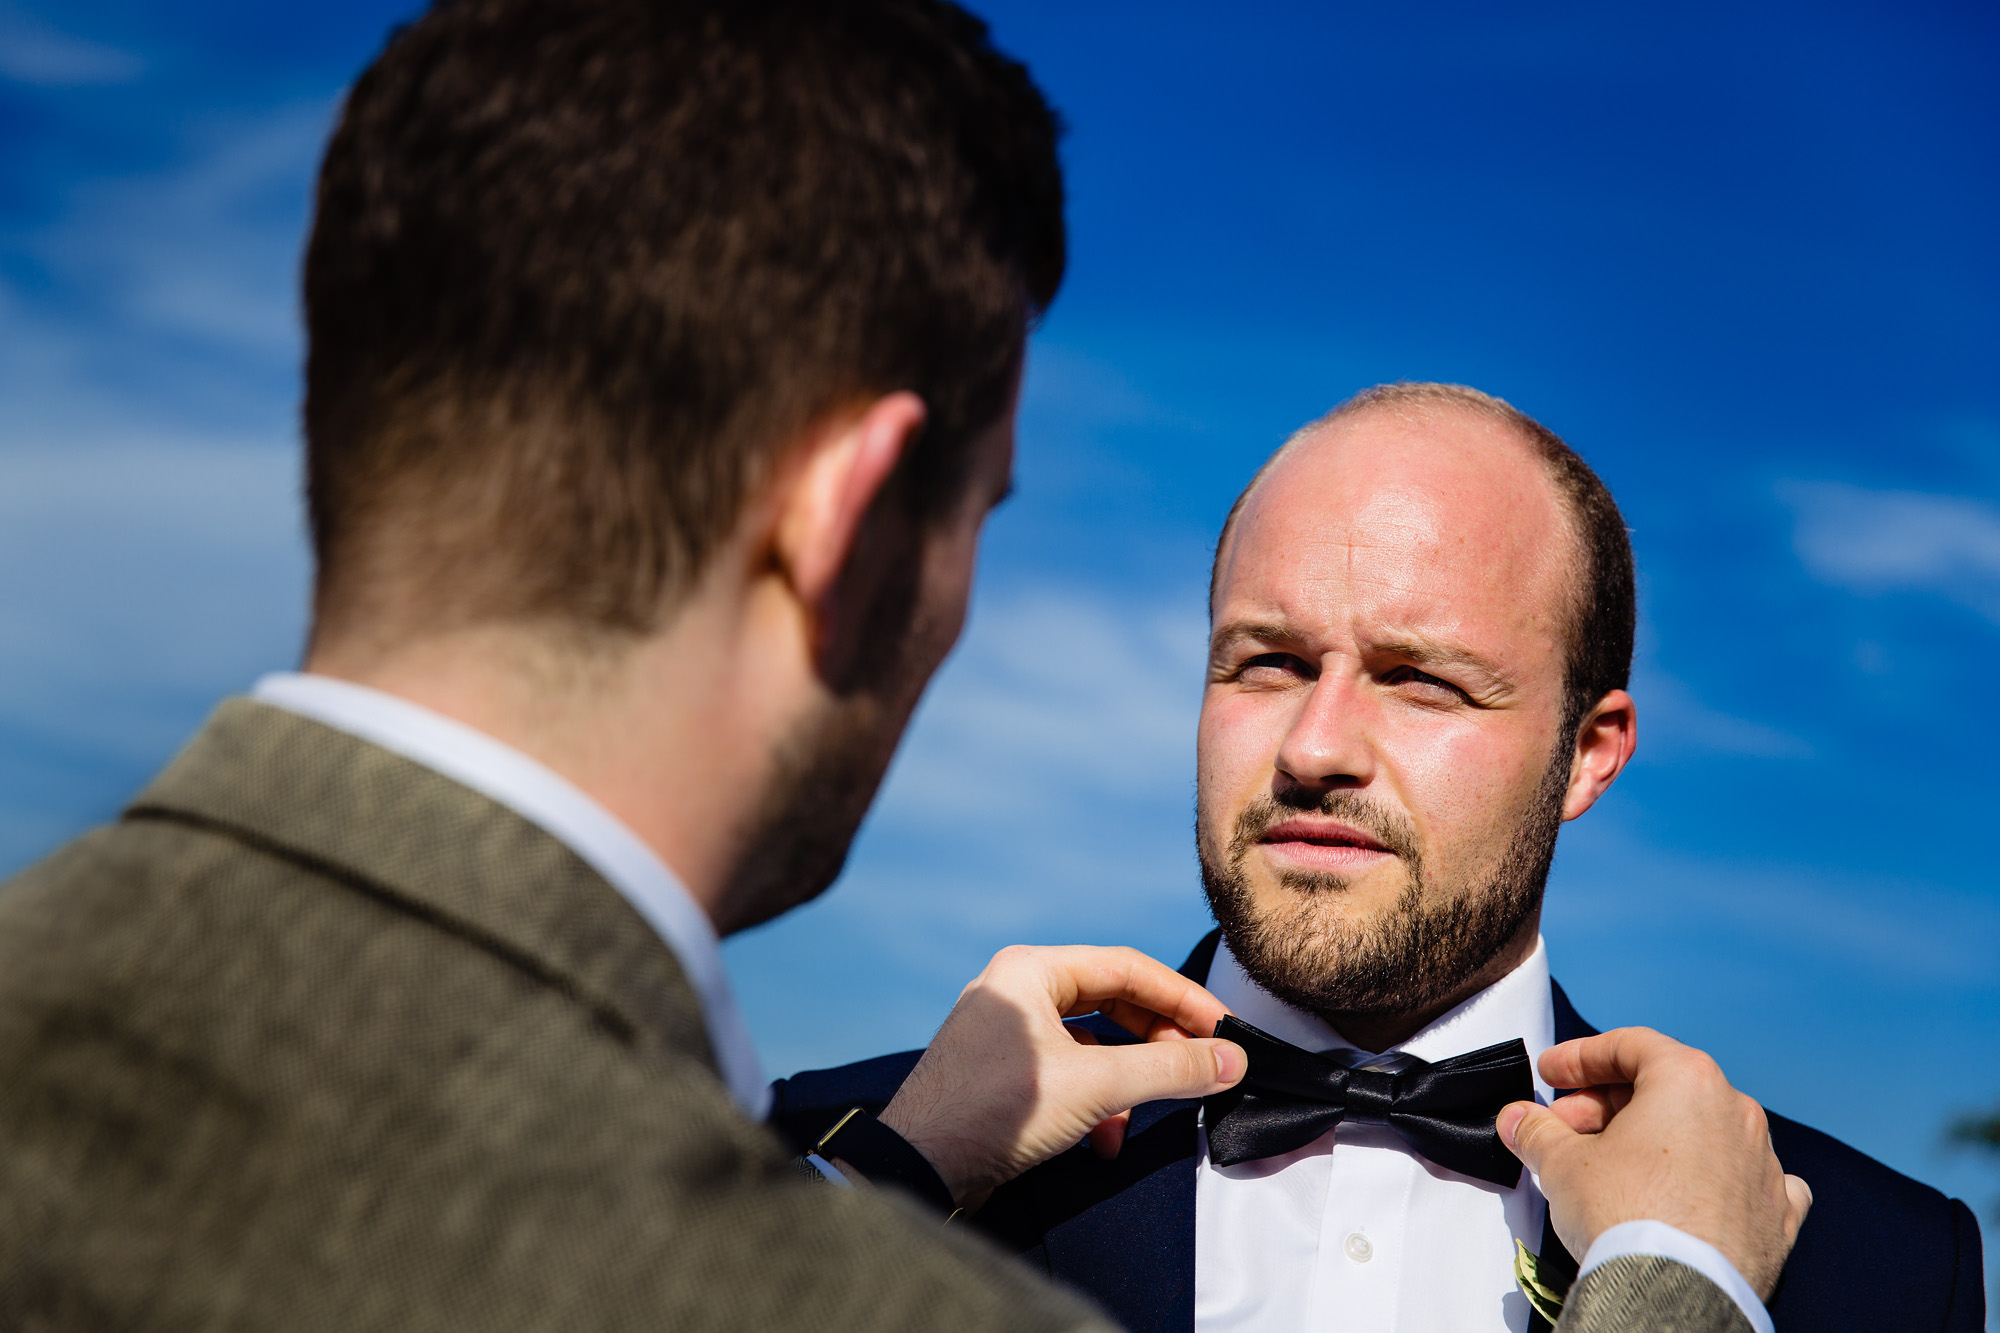 The groom perfects the best man's bow tie right before his wedding ceremony in Maine